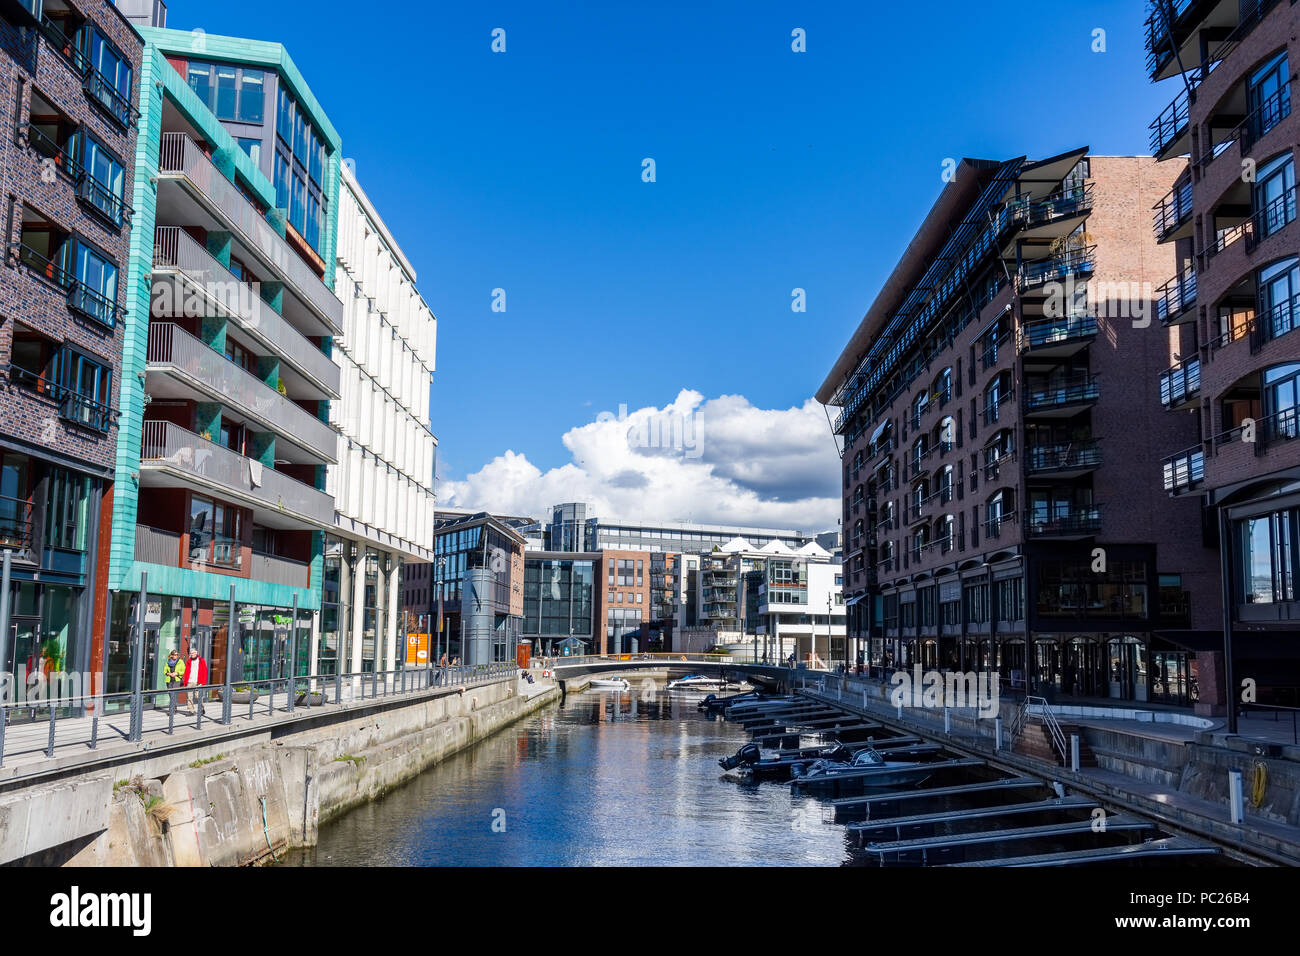 Typical example of Scandinavian architecture in the Aker Brygge area in Oslo, Norway Stock Photo